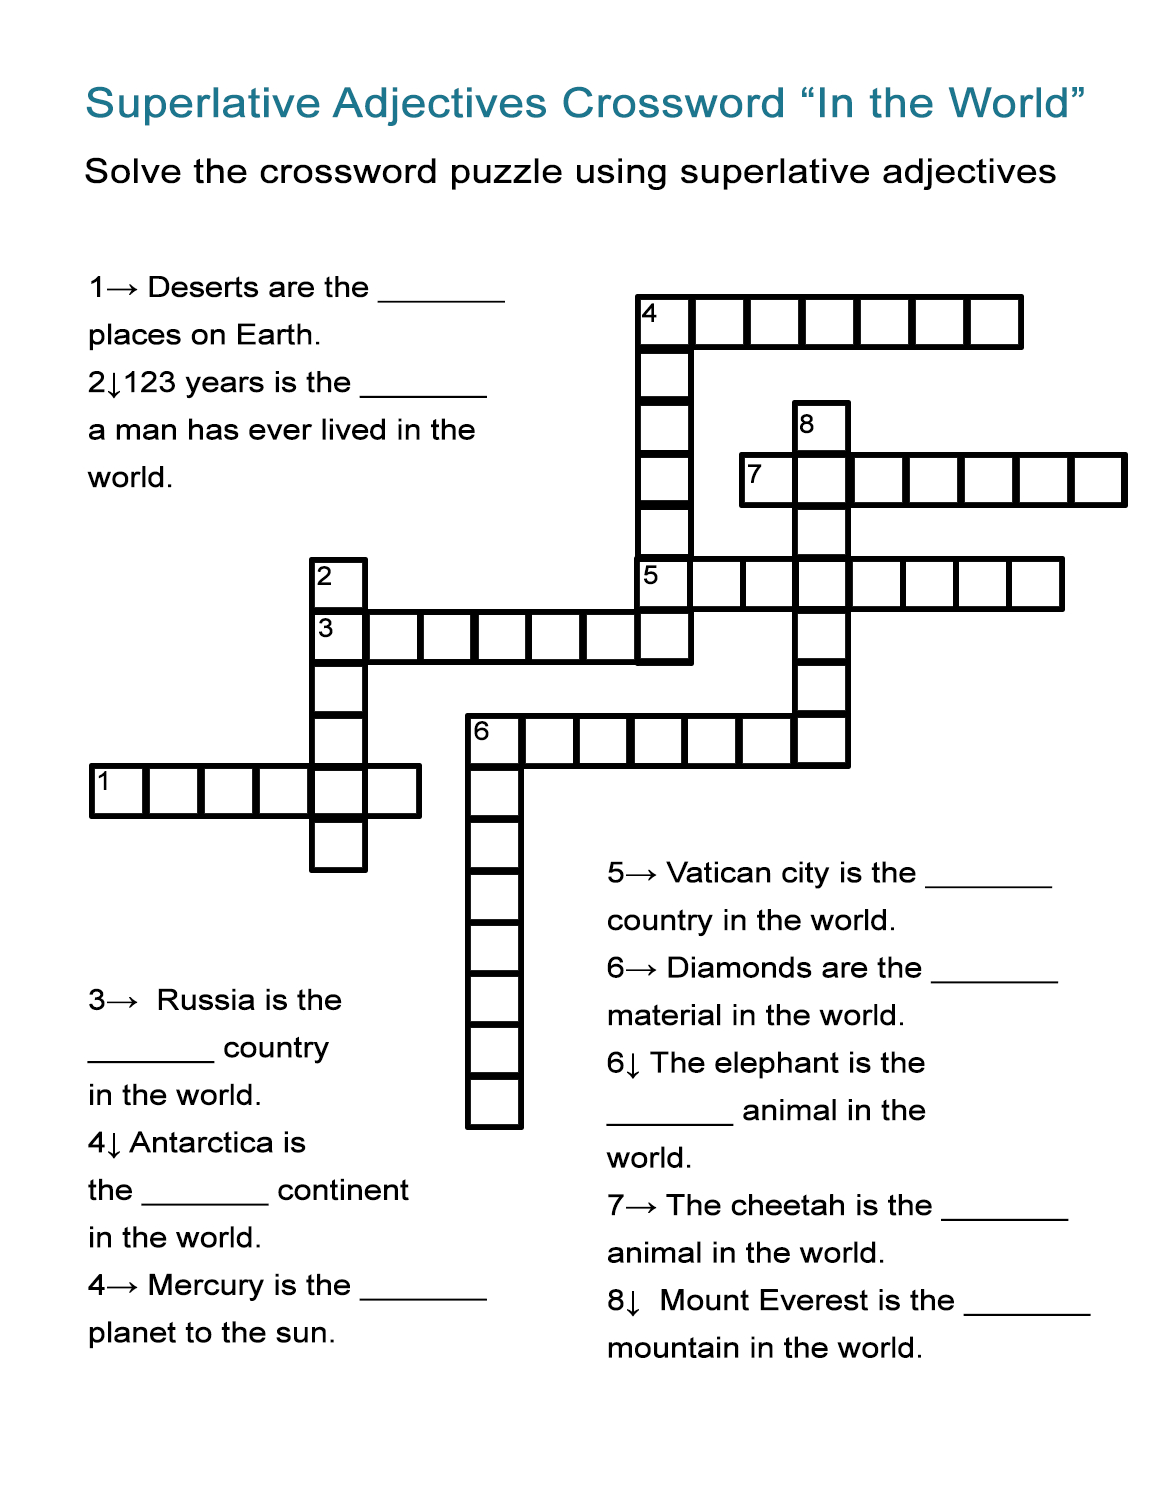 Superlative Adjectives Worksheet - &amp;quot;in The World&amp;quot; Crossword Puzzle - Adjectives Crossword Puzzle Printable